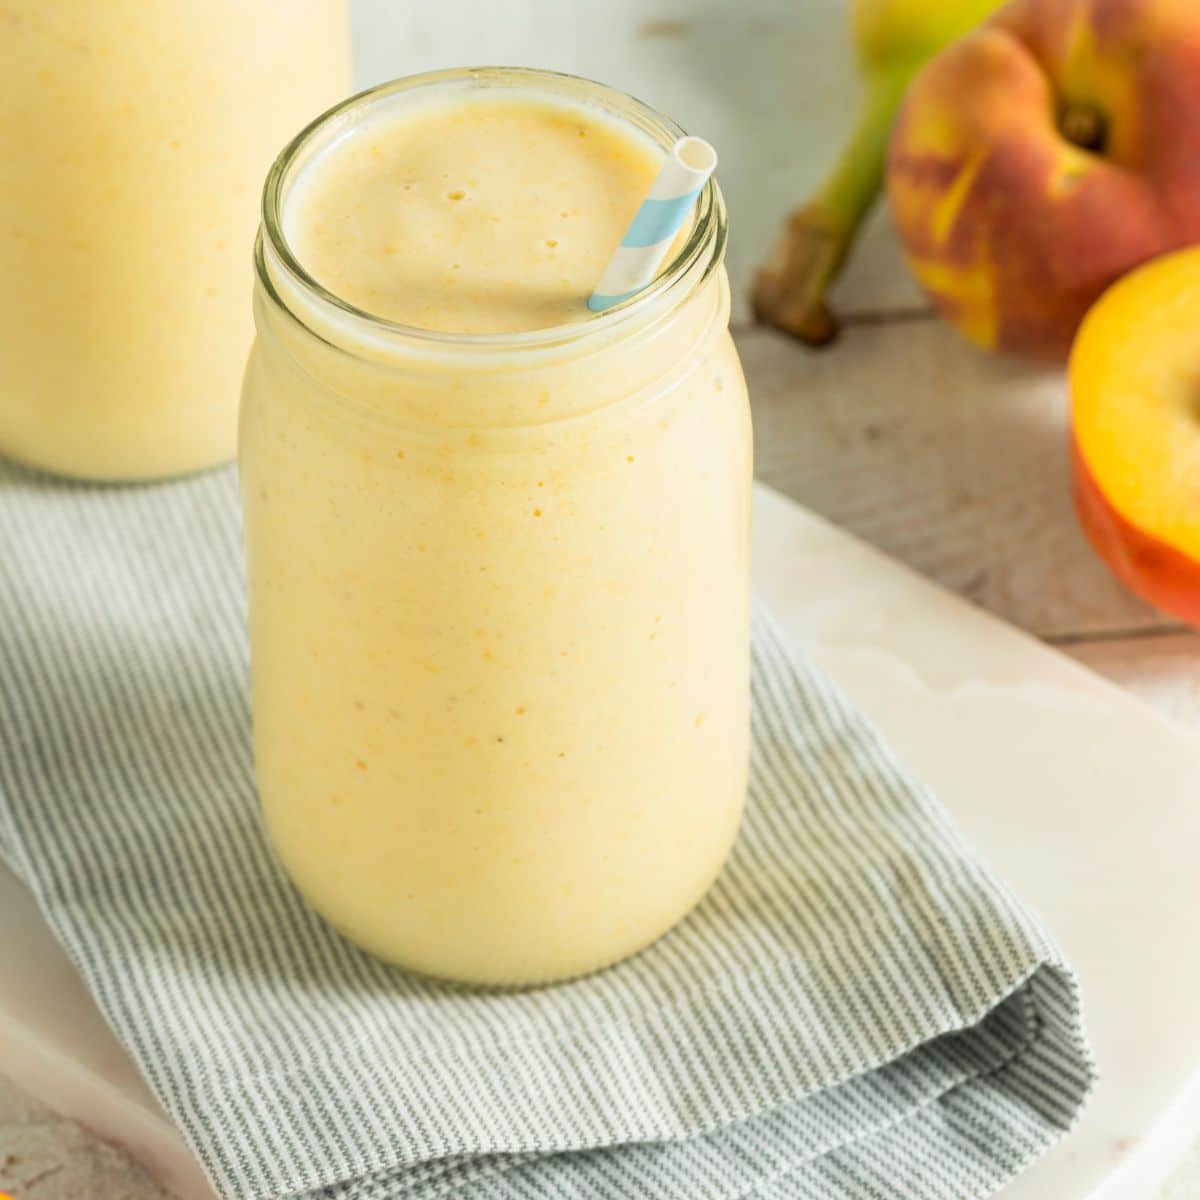 A cold and creamy pineapple peach smoothie in a clear glass cup with a blue and white striped straw.